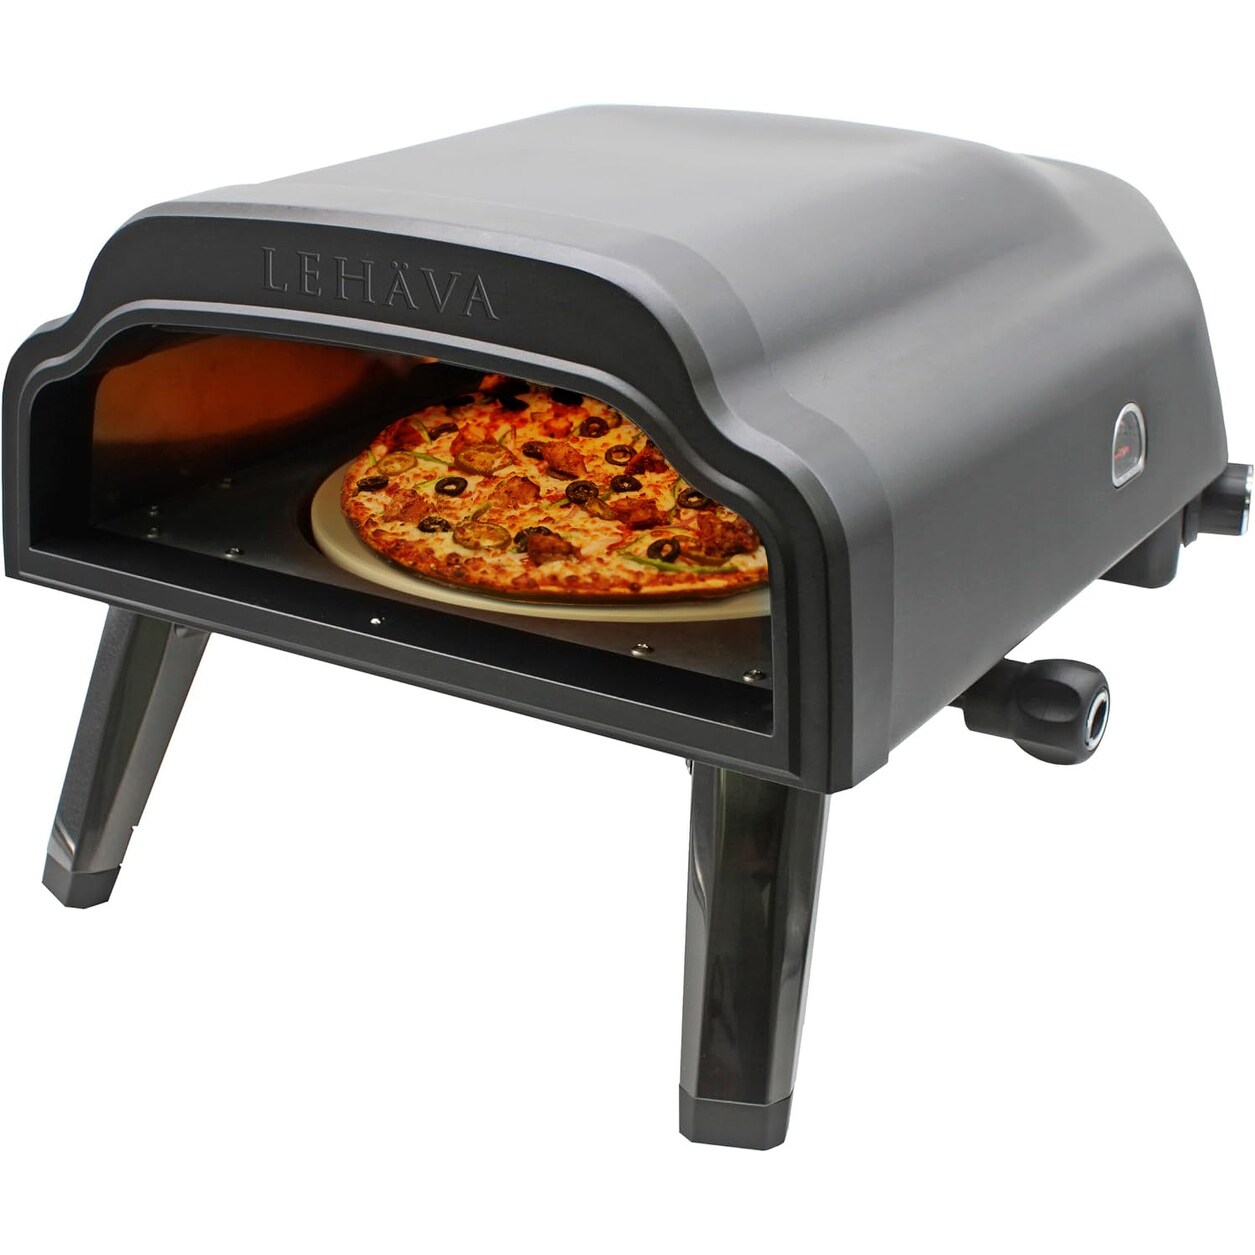 https://ak1.ostkcdn.com/images/products/is/images/direct/1f6d6b88b0cbe61c5f51ce0711df24e8f7cd1d82/Flame-King-LEHAVA-14%22-Portable-Pizza-Oven.jpg